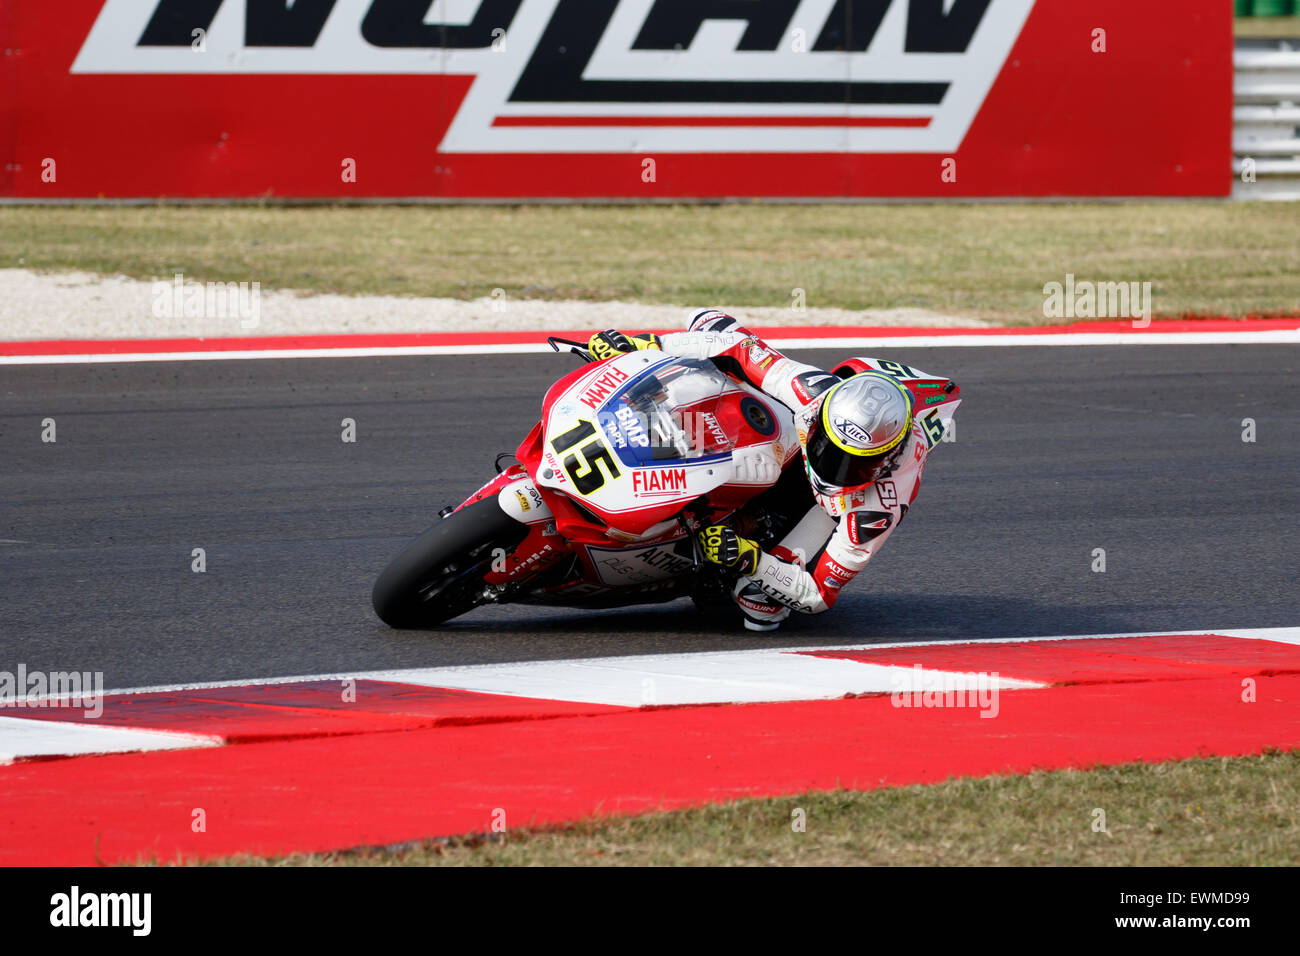 Misano Adriatico, Italy - June 21, 2015: Ducati Panigale R of Althea Racing Team, driven by BAIOCCO Matteo Stock Photo